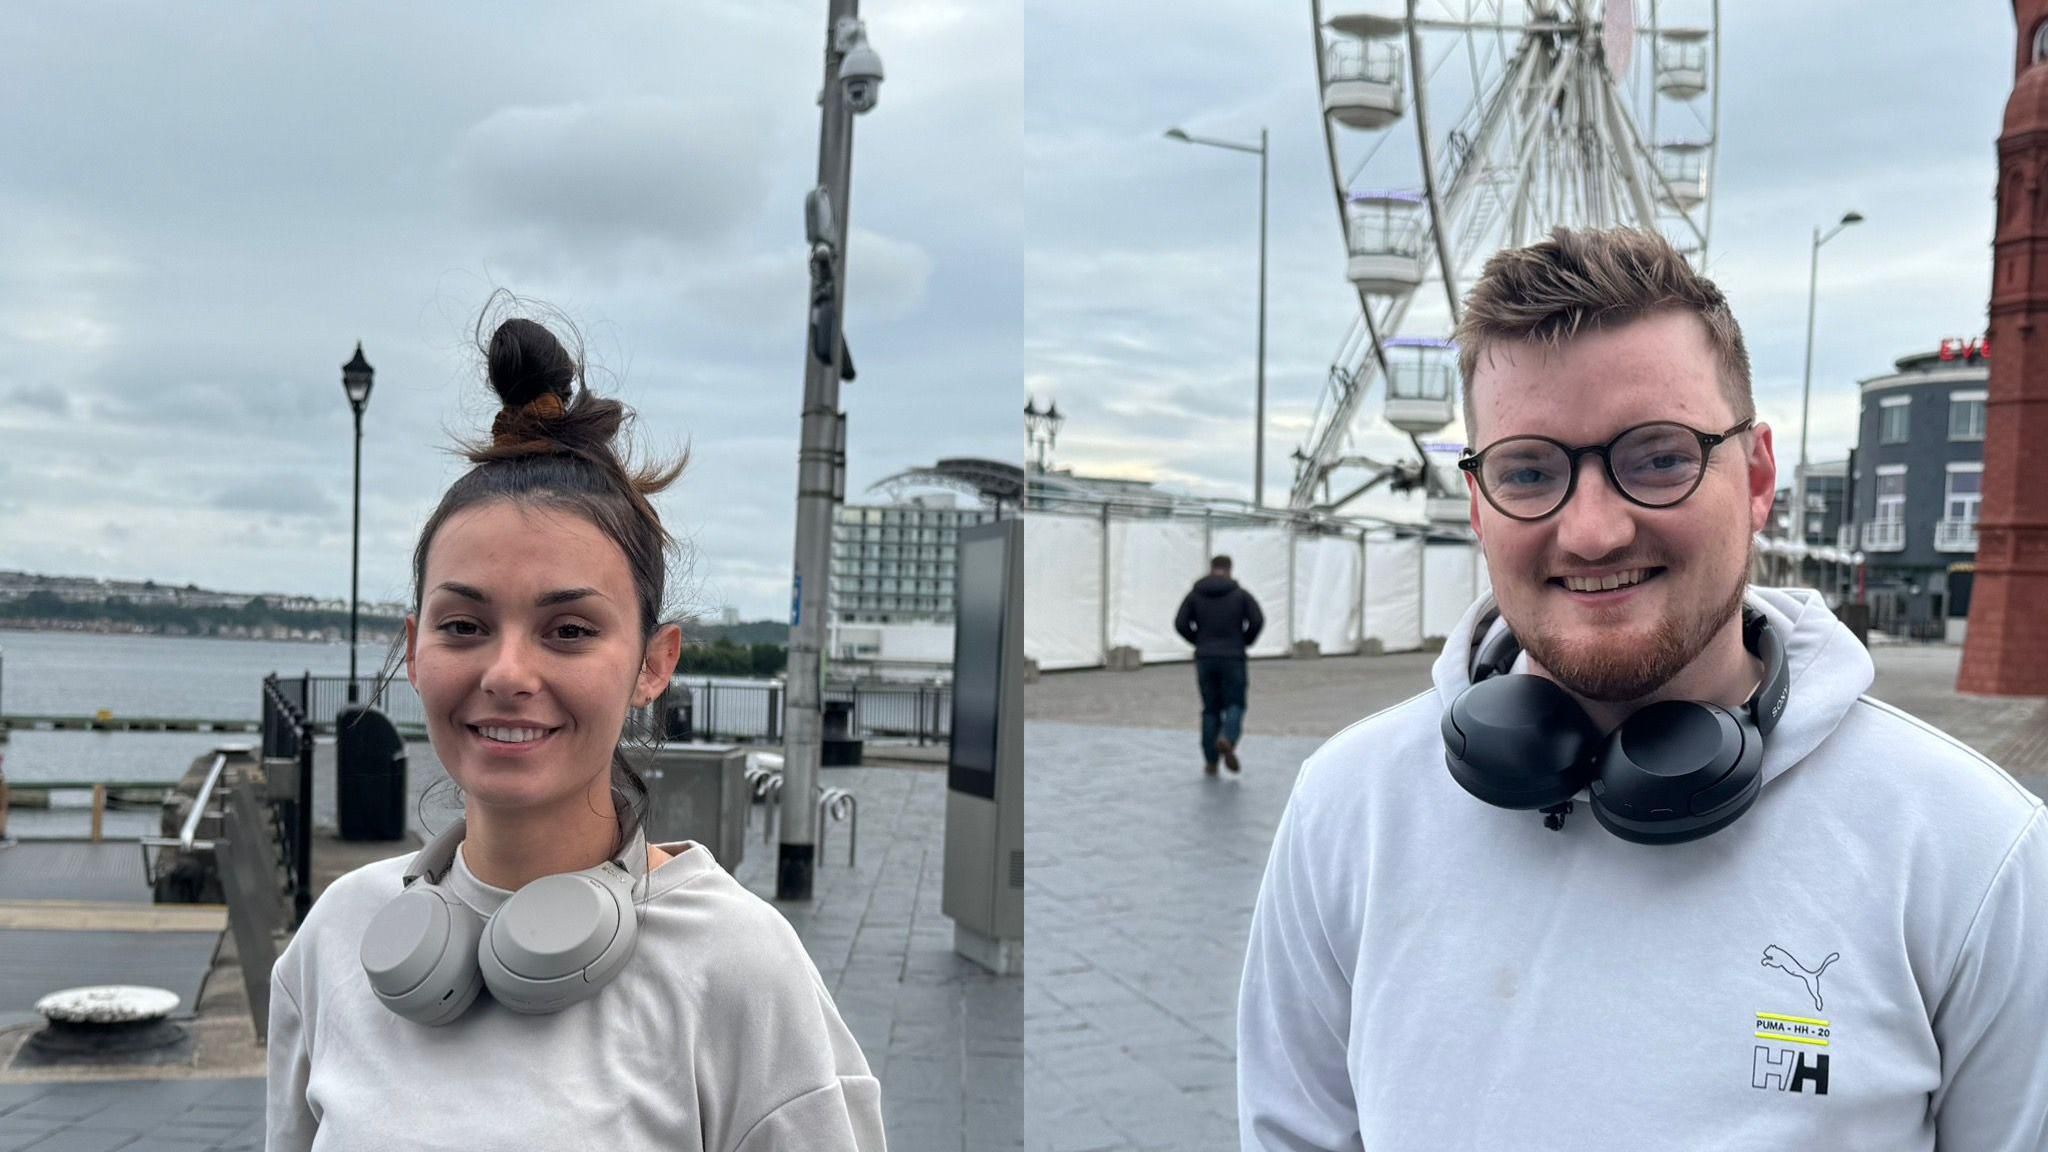 Lucy Jones, a female, and Will Harris, a male, smiling at the camera out in Cardiff Bay. Both are wearing sports clothing and have headphones around their necks.